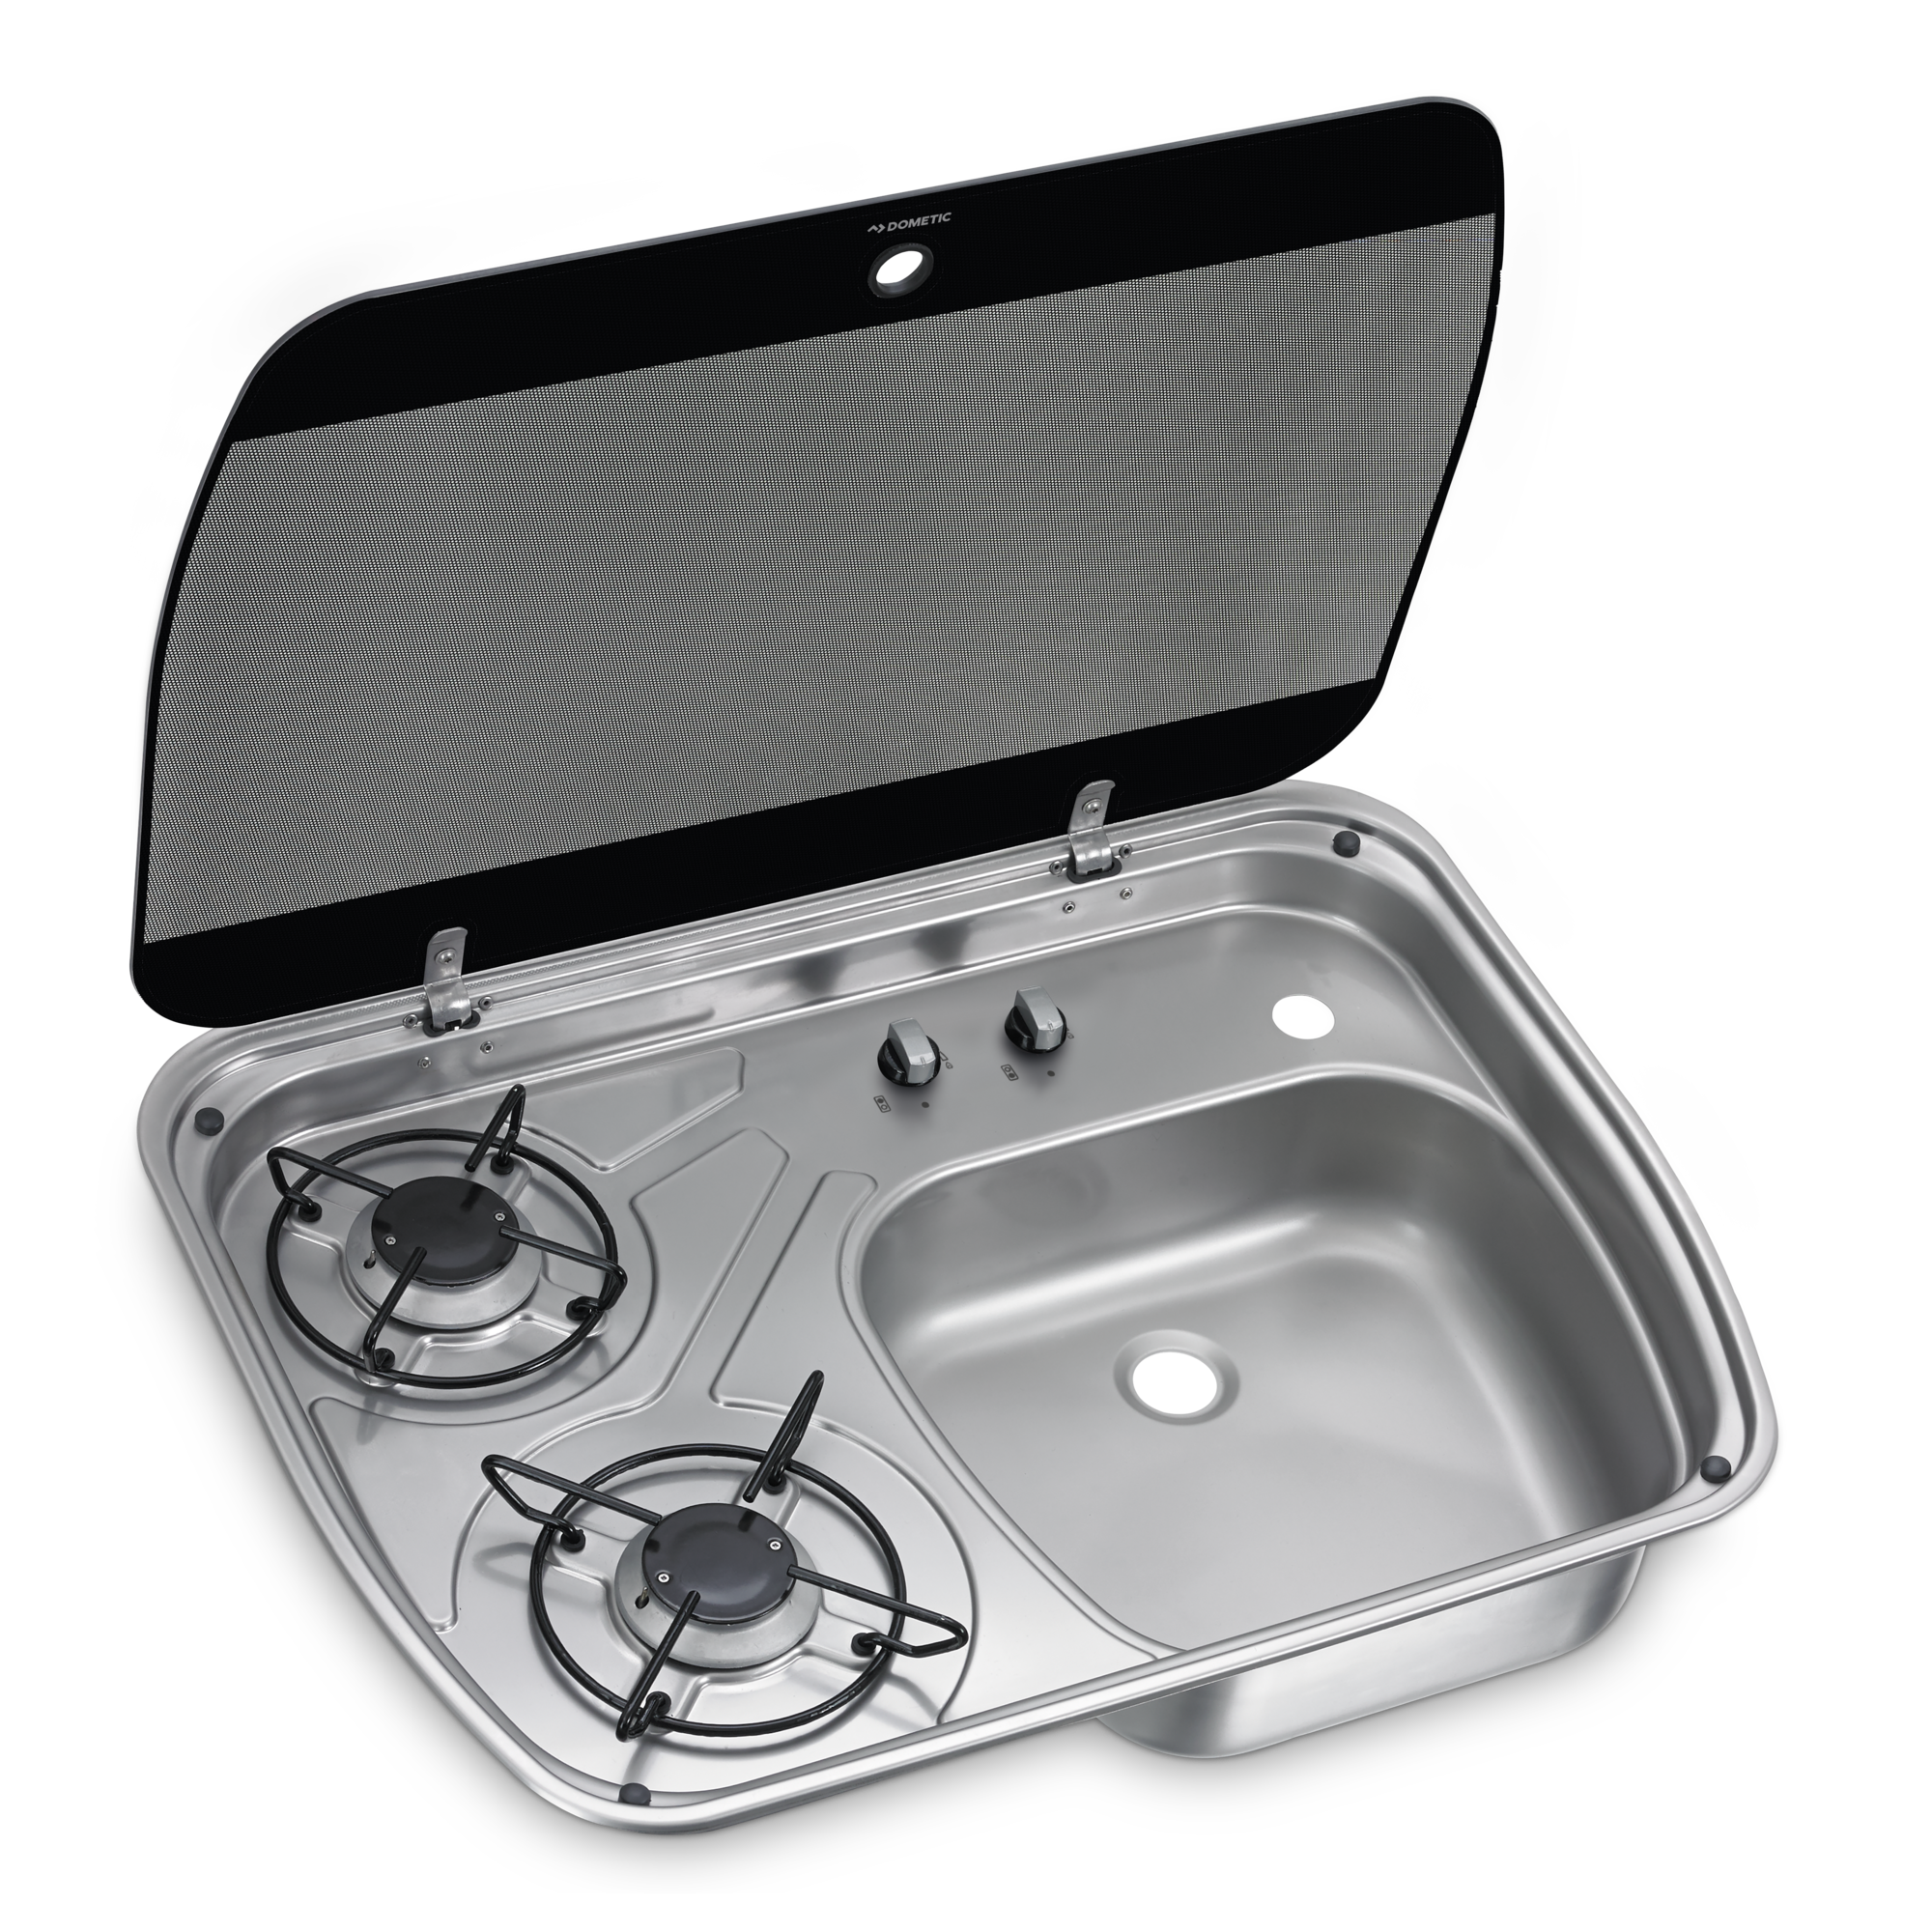 DOMETIC HSG 2445 2-Burner Hob/Sink Combination With Glass Lid